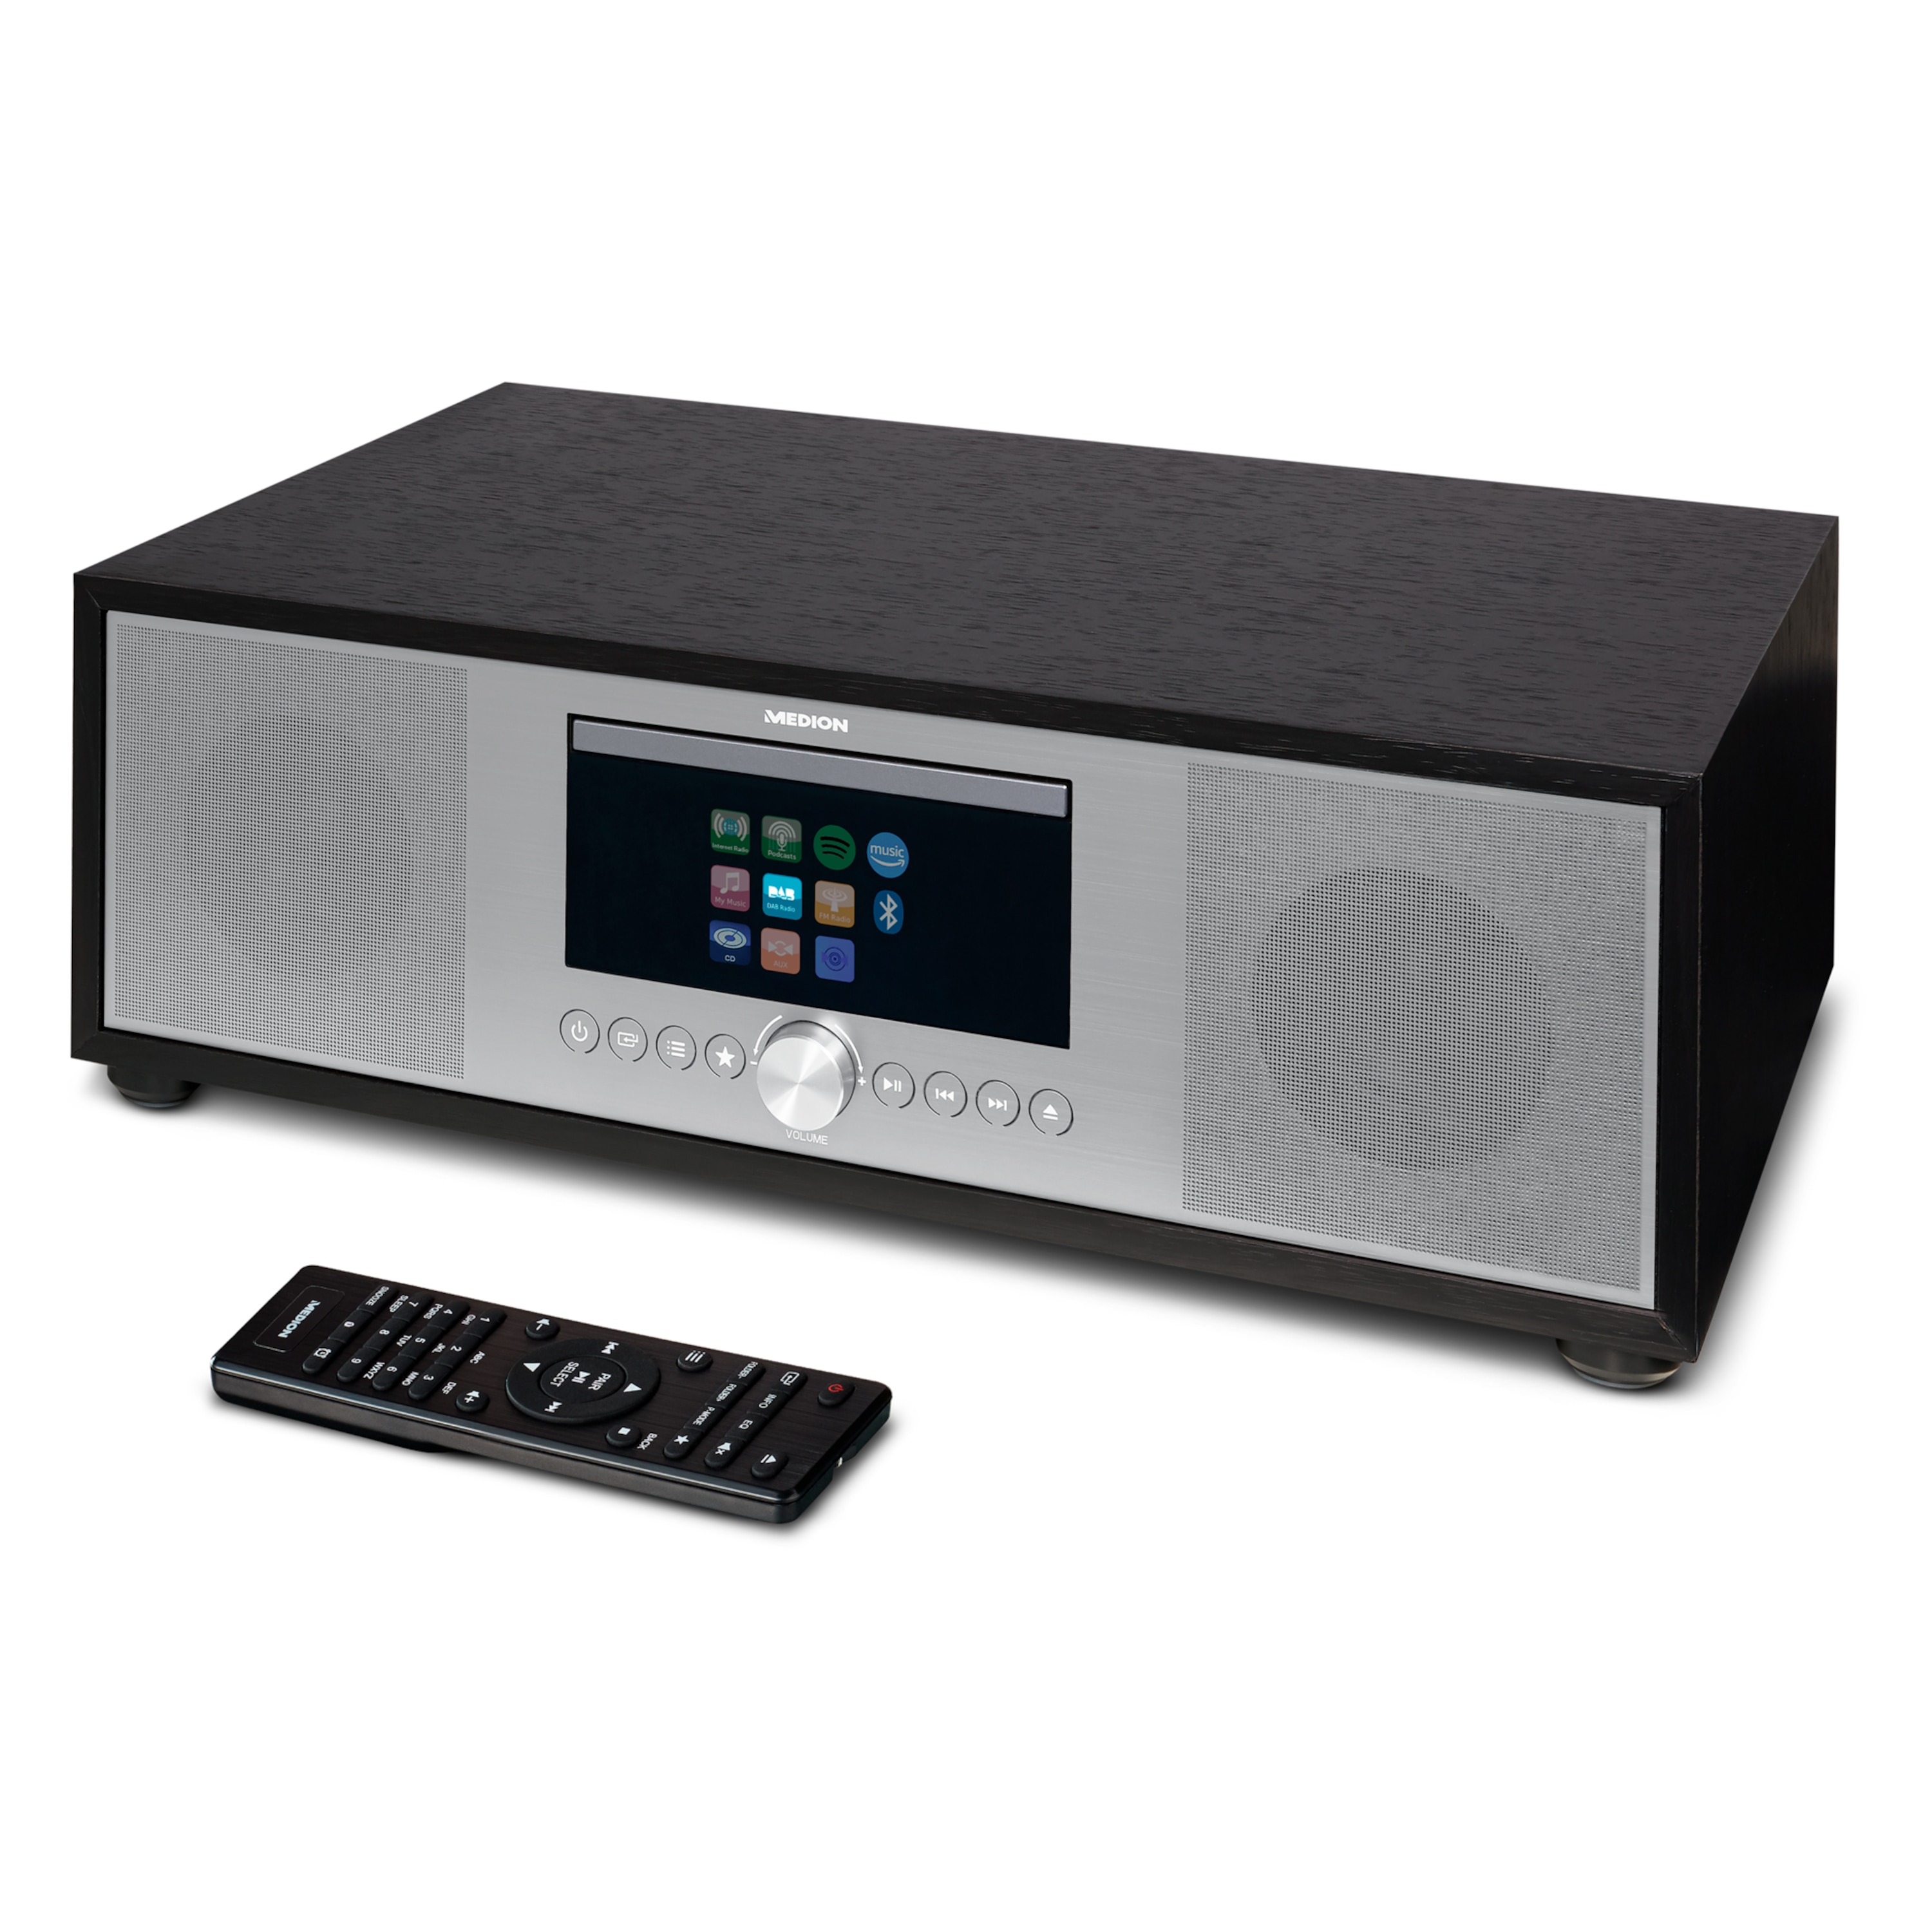 LIFE® P66400 All-in-One Audio Systeem | LCD-Display 7 |1 (2.8'') | Internet/DAB+/PLL-UKW Radio | CD/MP3-Player | Bluetooth® | WLAN | RDS | 2.1 Soundsystem | 2 x 20 W + 40 W RMS